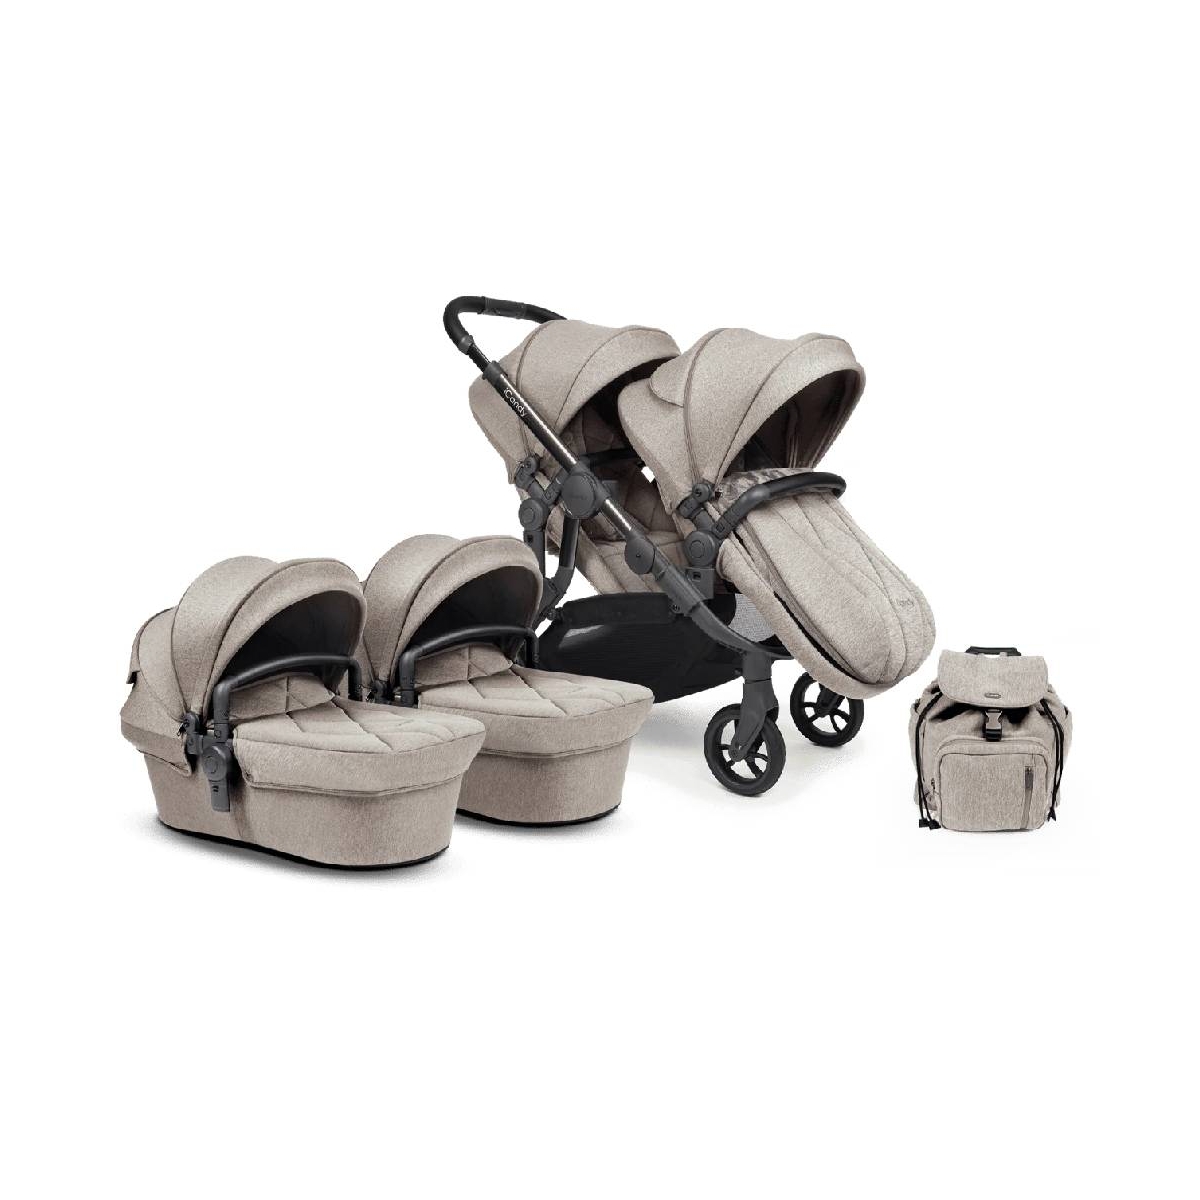 Image of iCandy Orange Twin Pushchair and Carrycot - Sandstone Marl